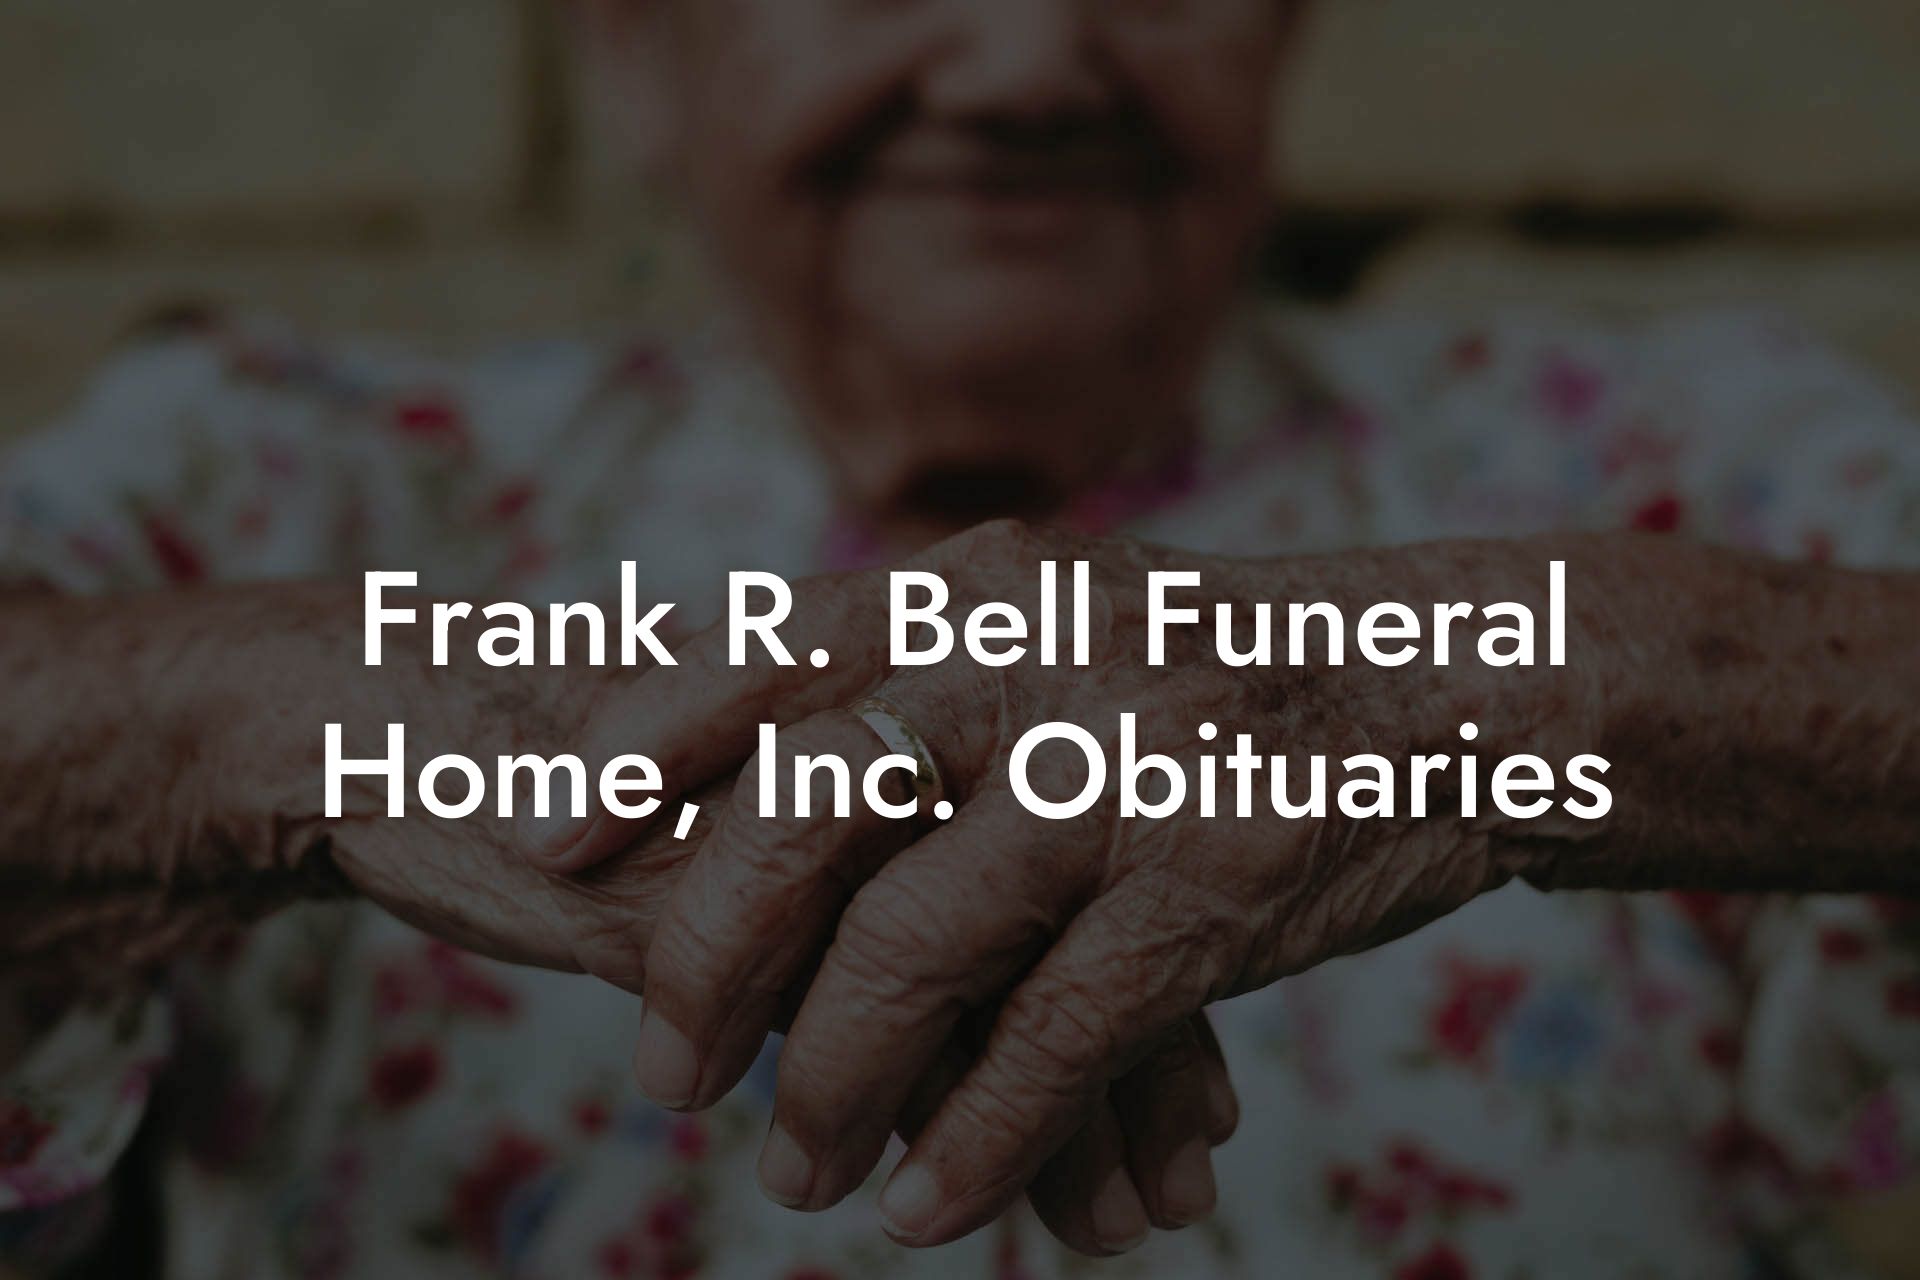 Frank R. Bell Funeral Home, Inc. Obituaries